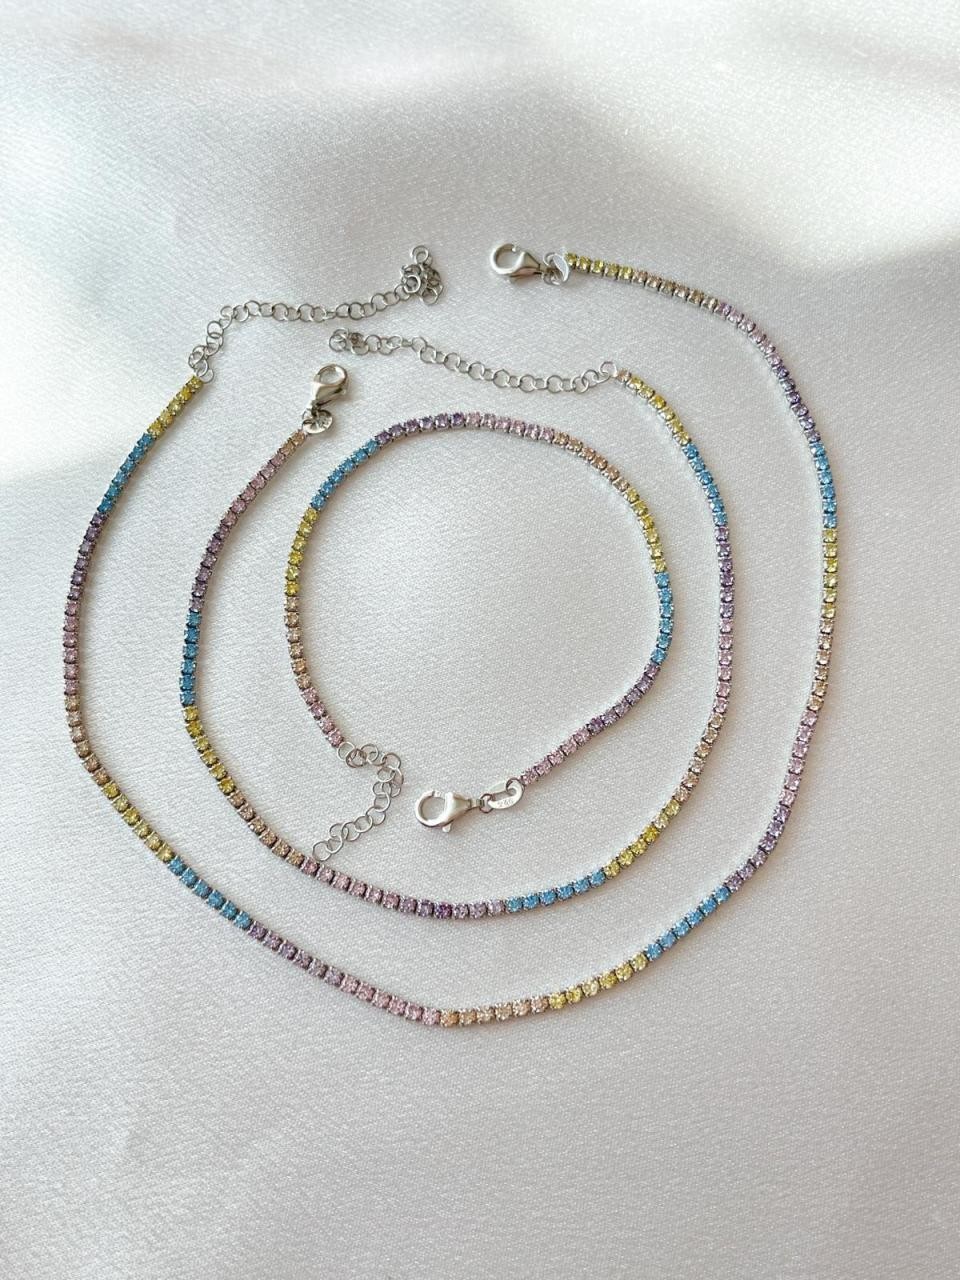 Colorful Pastel 925 Silver Anklet